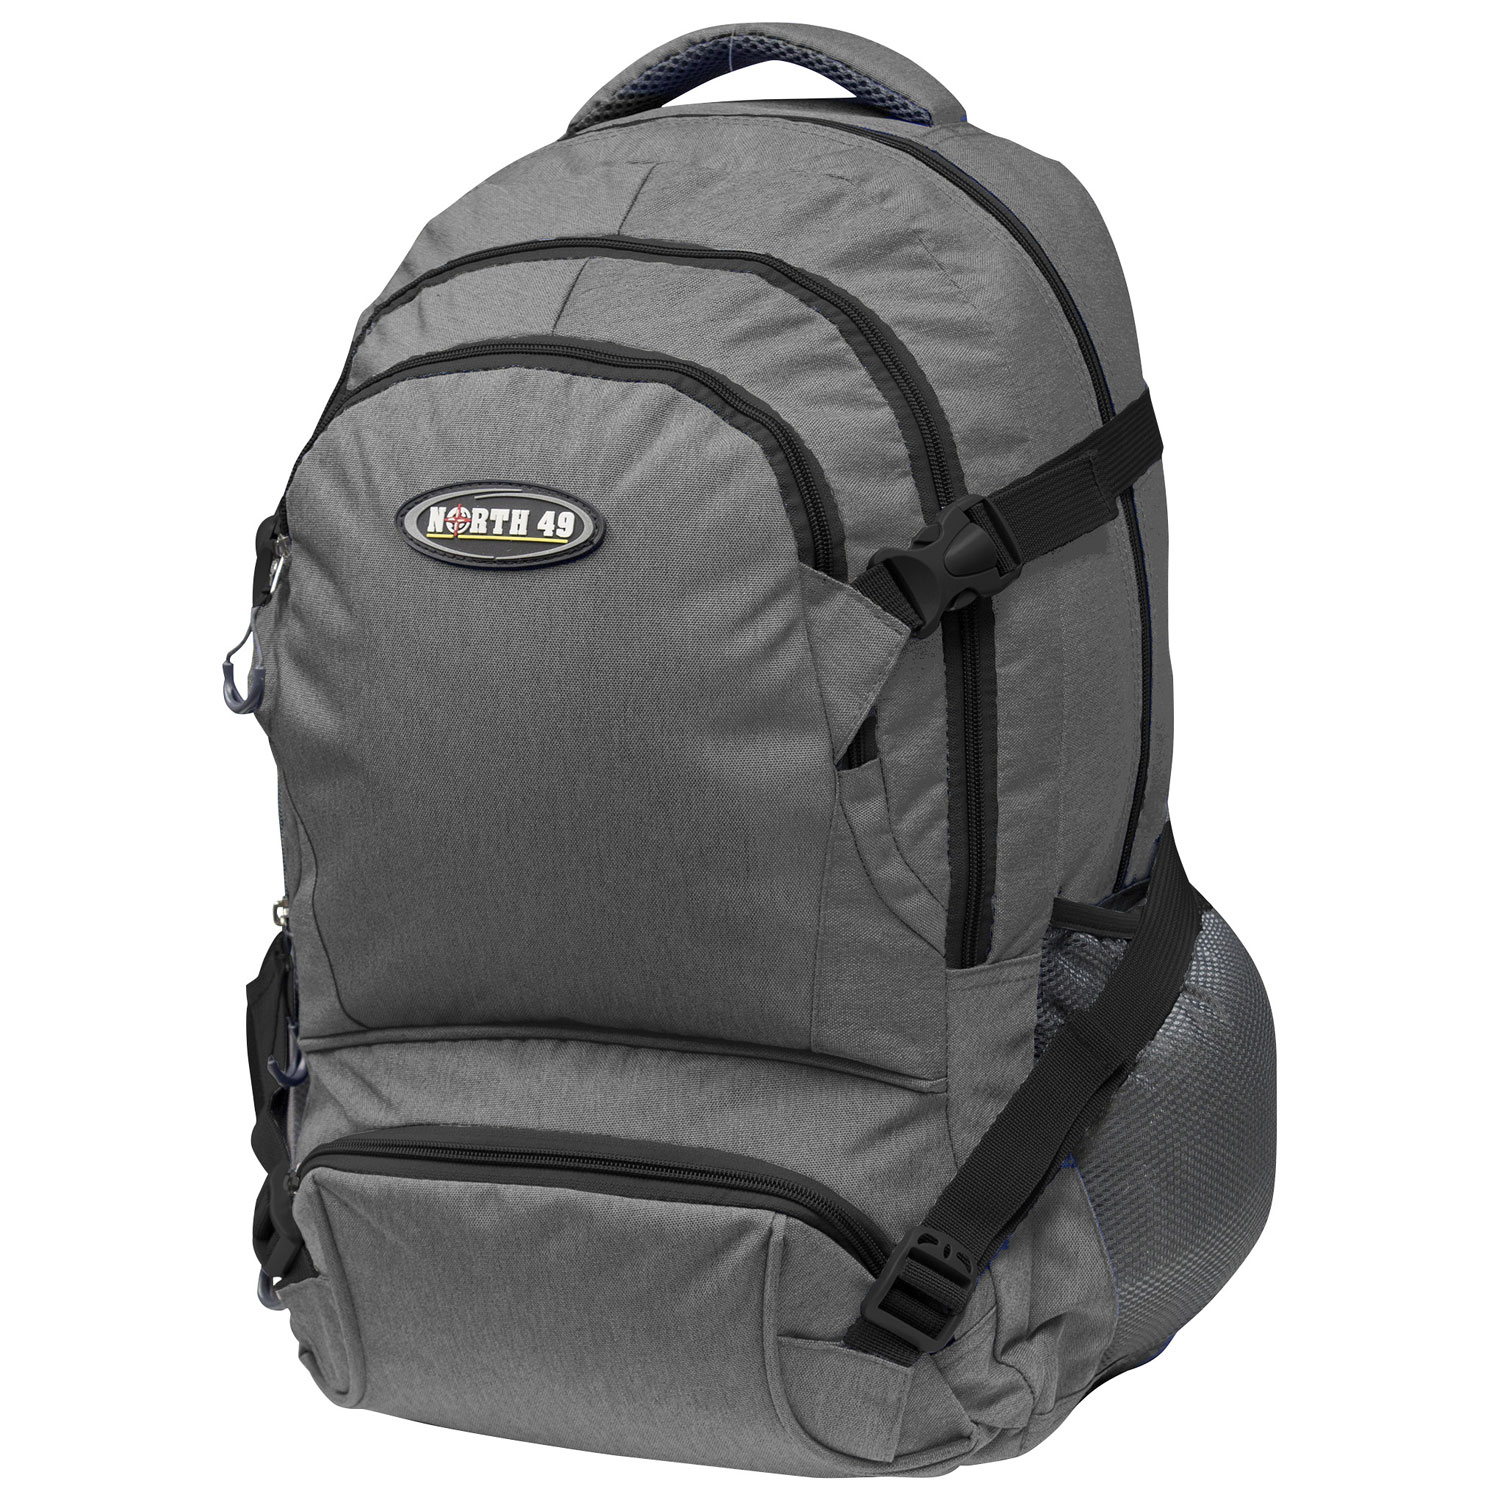 north 49 backpack